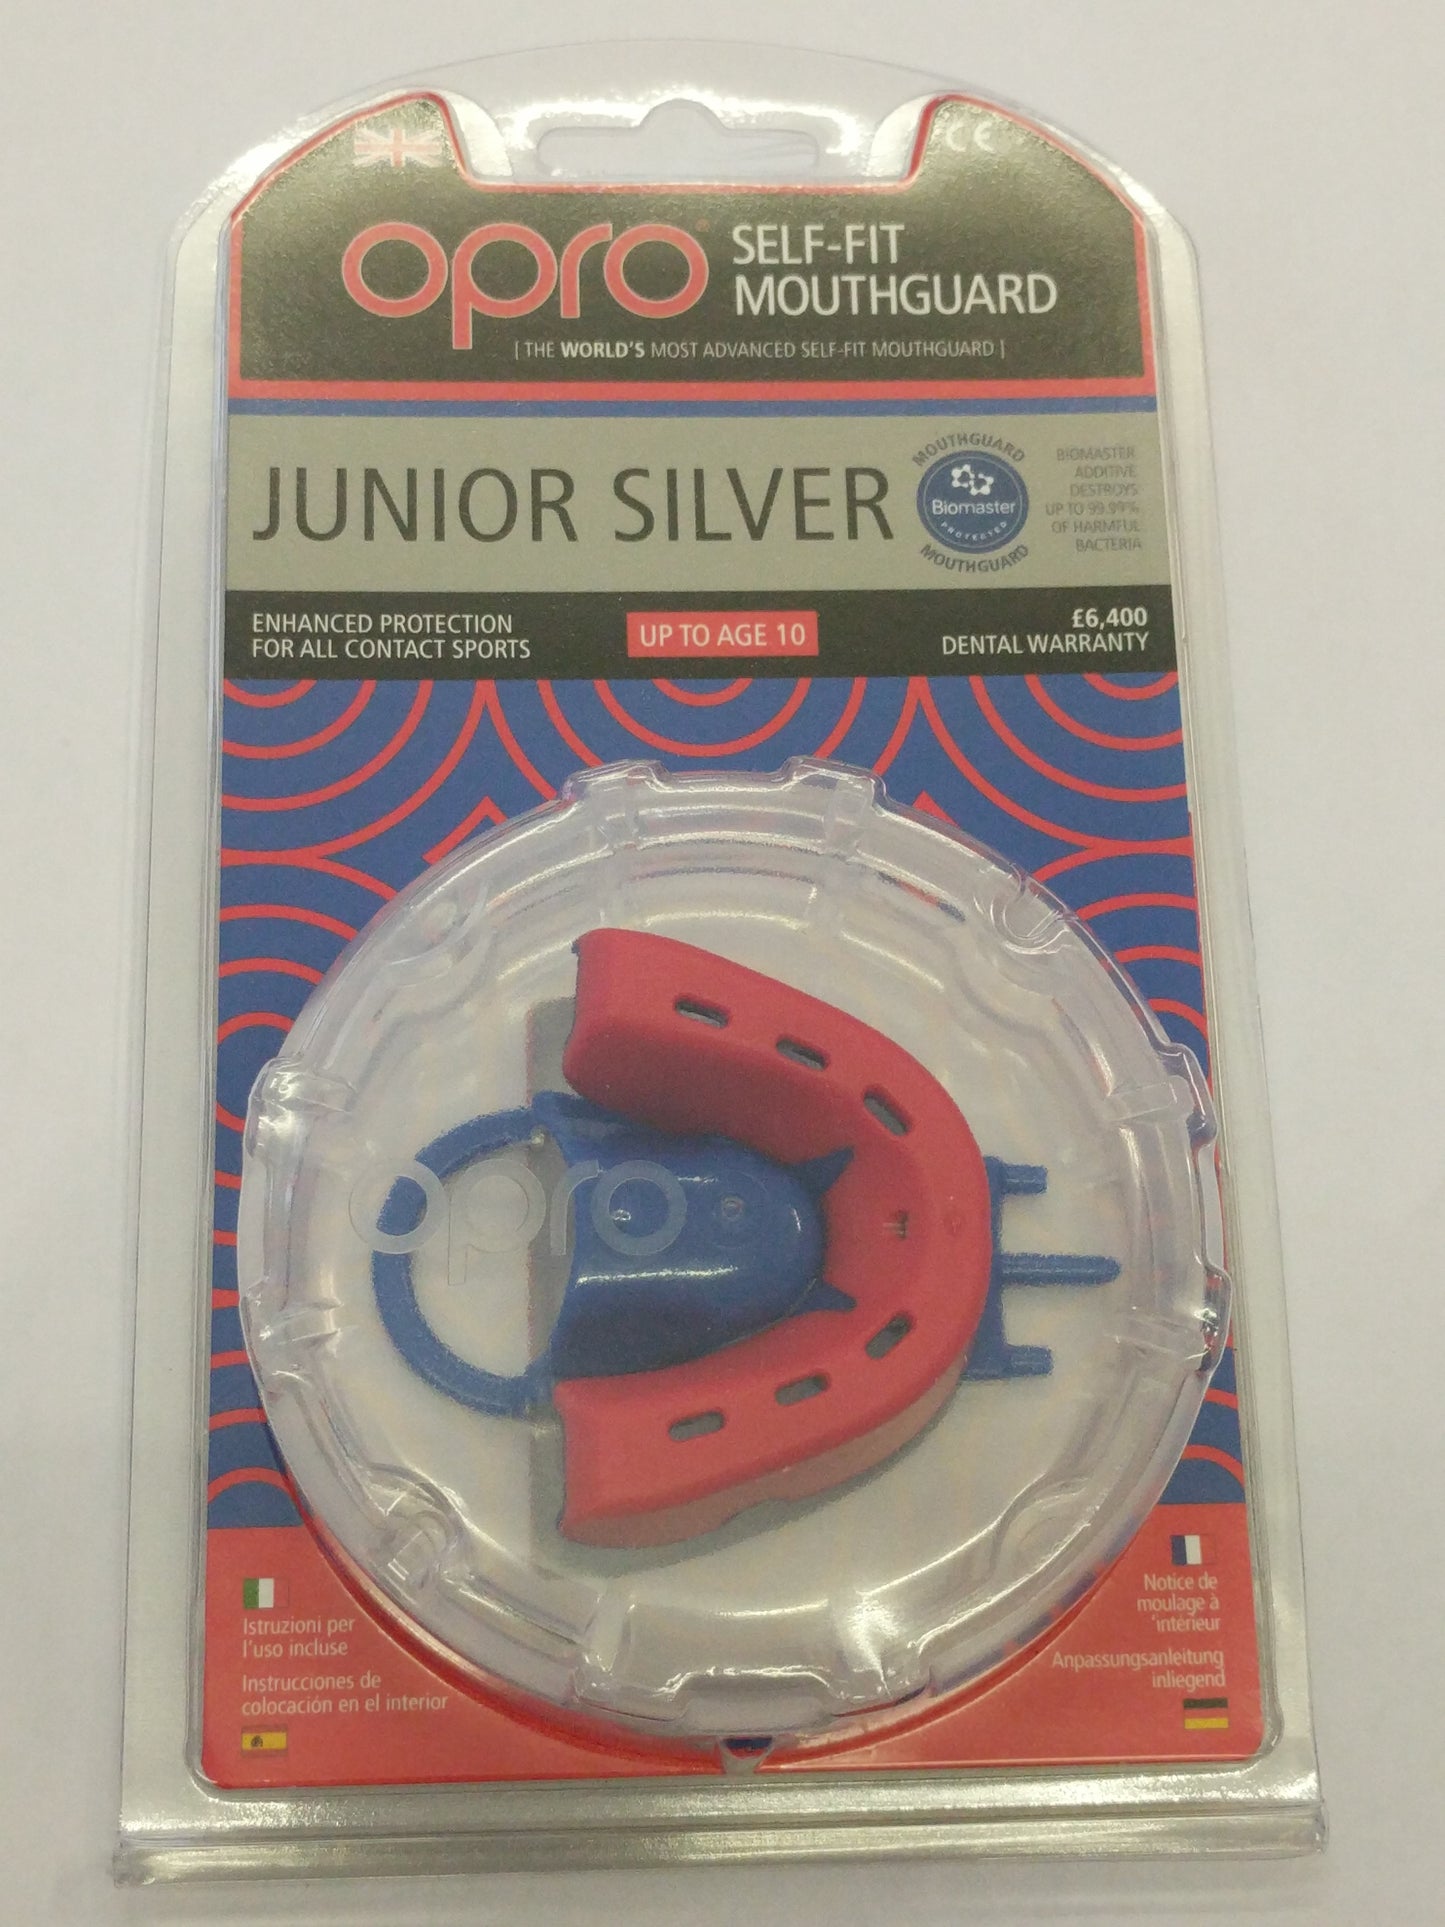 Opro junior Silver protection Self fit Mouthguard gumshield red or pink